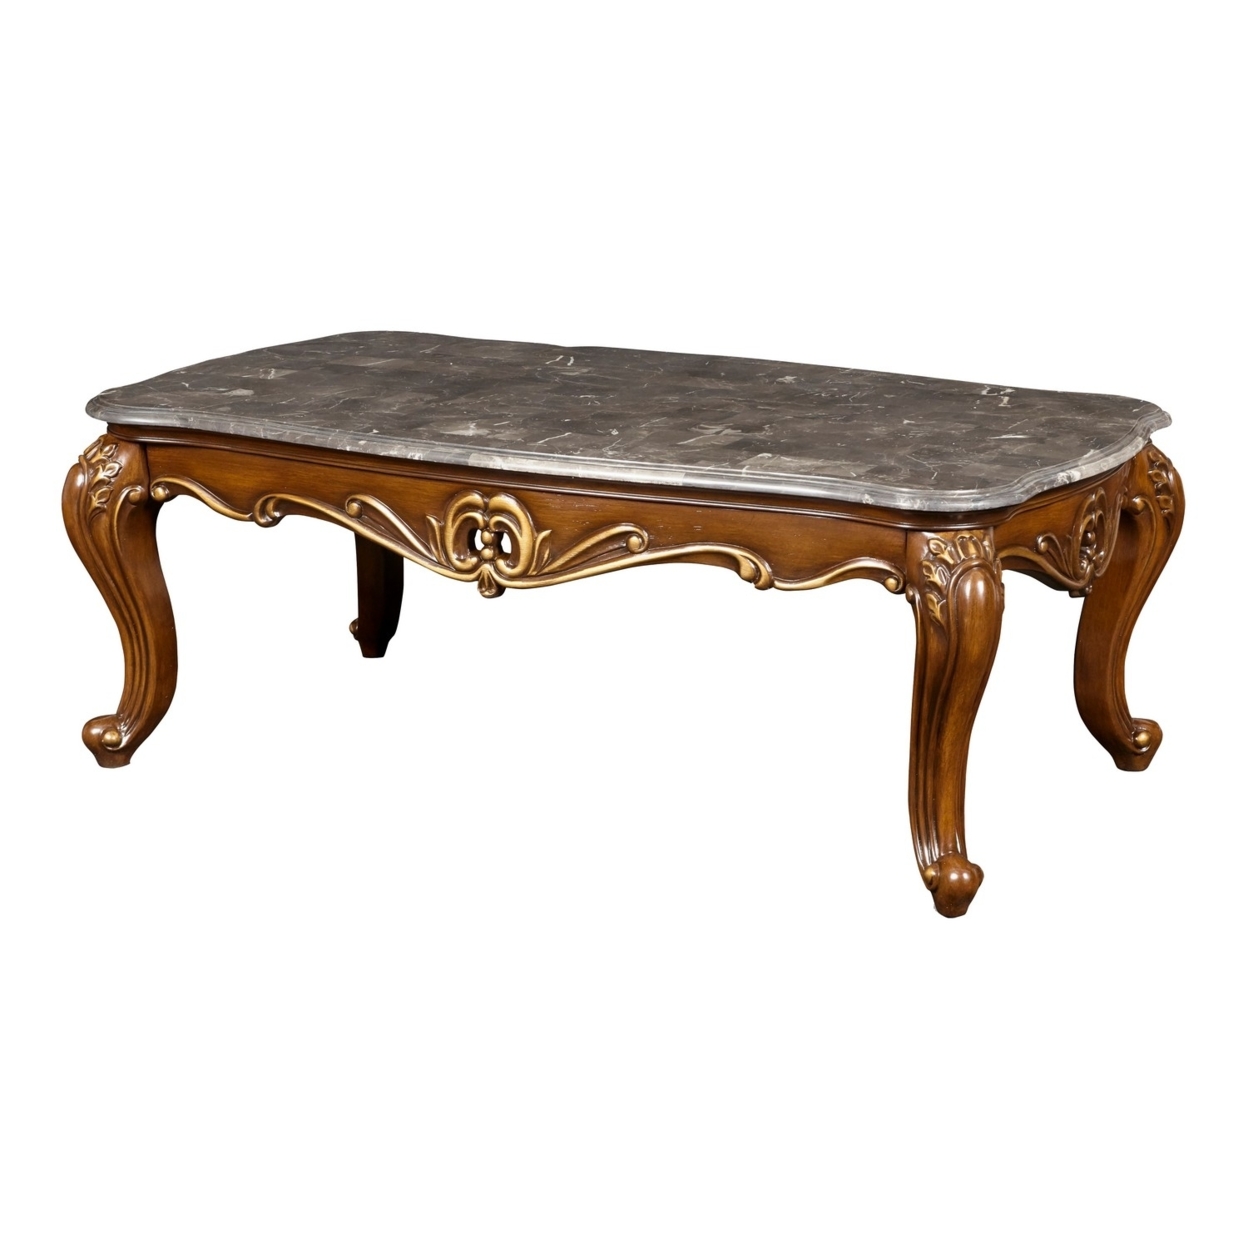 Wooden Cocktail Table With Marble Top And Carved Details, Gray And Brown- Saltoro Sherpi